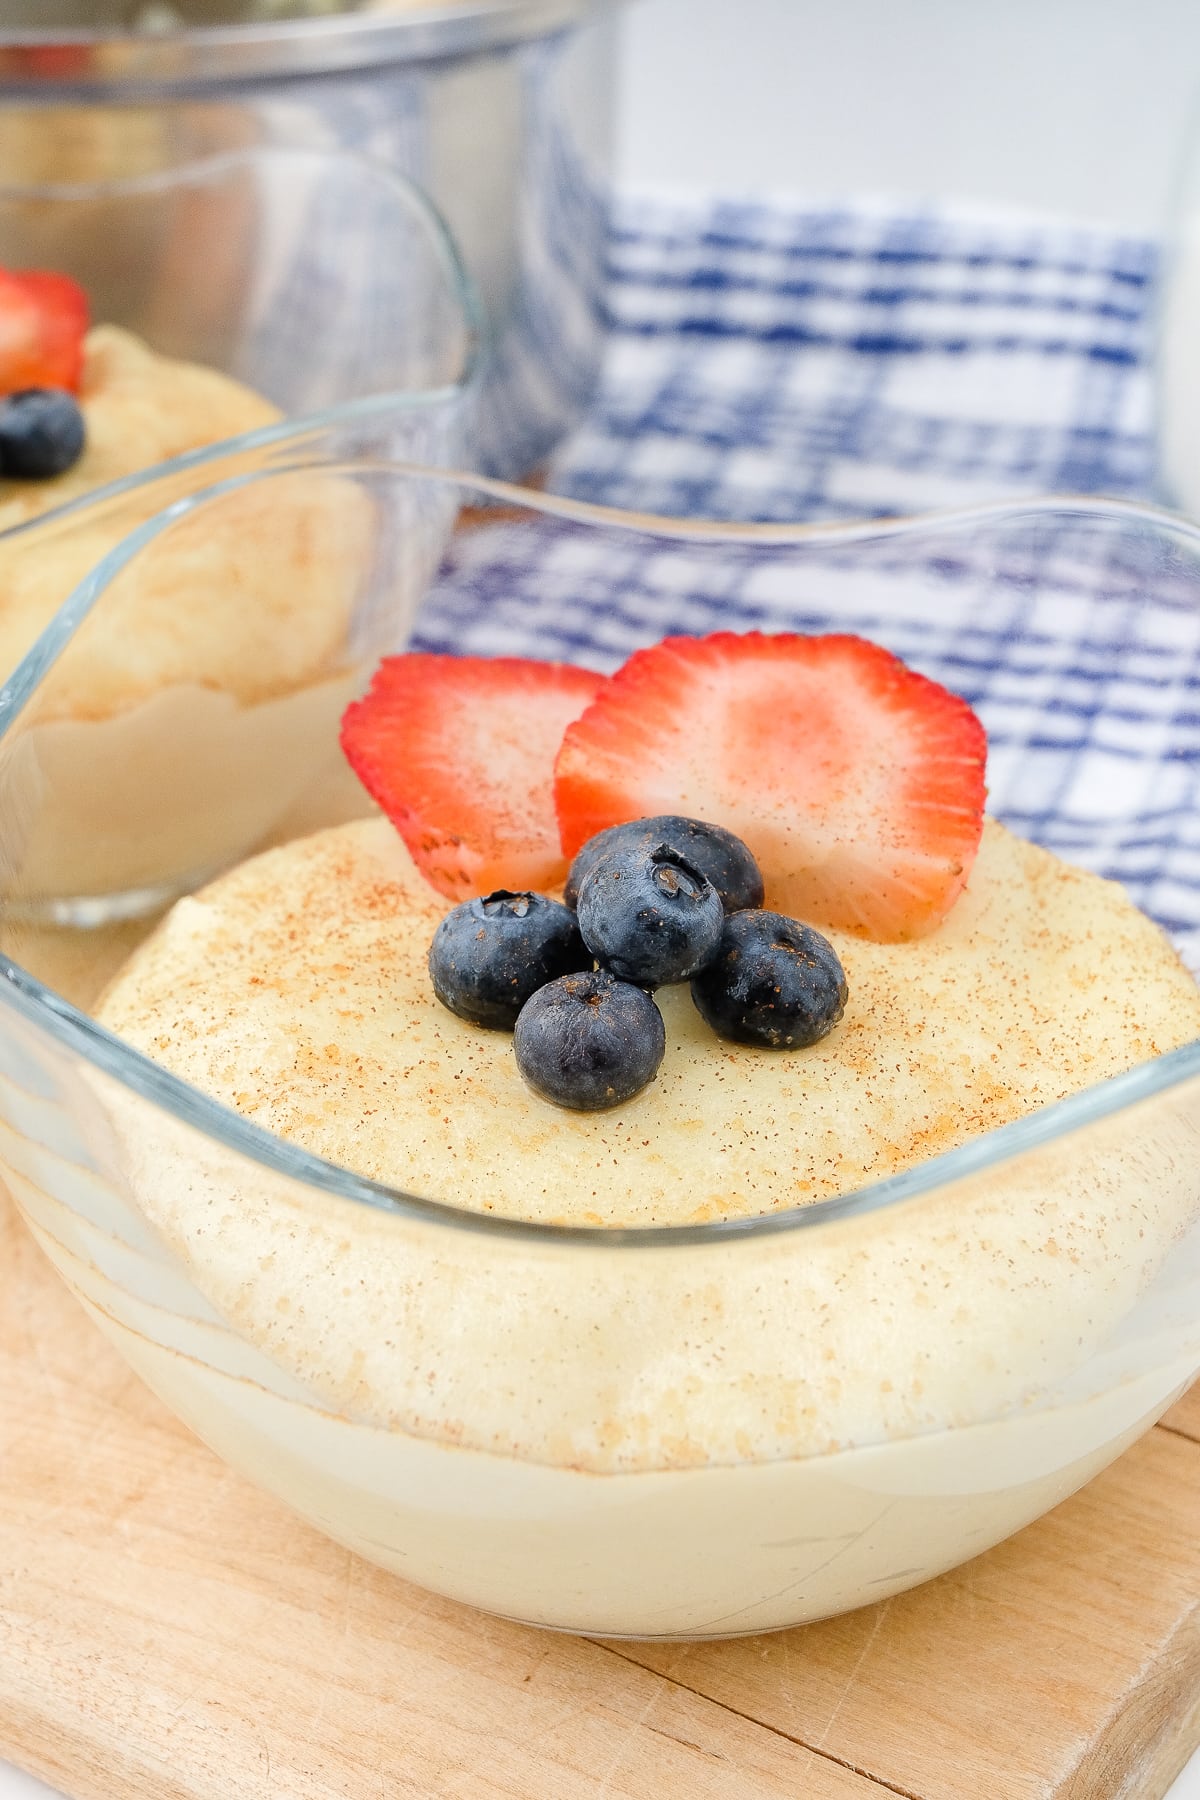 semolina pudding in clear glass bowl on wood with berries on top